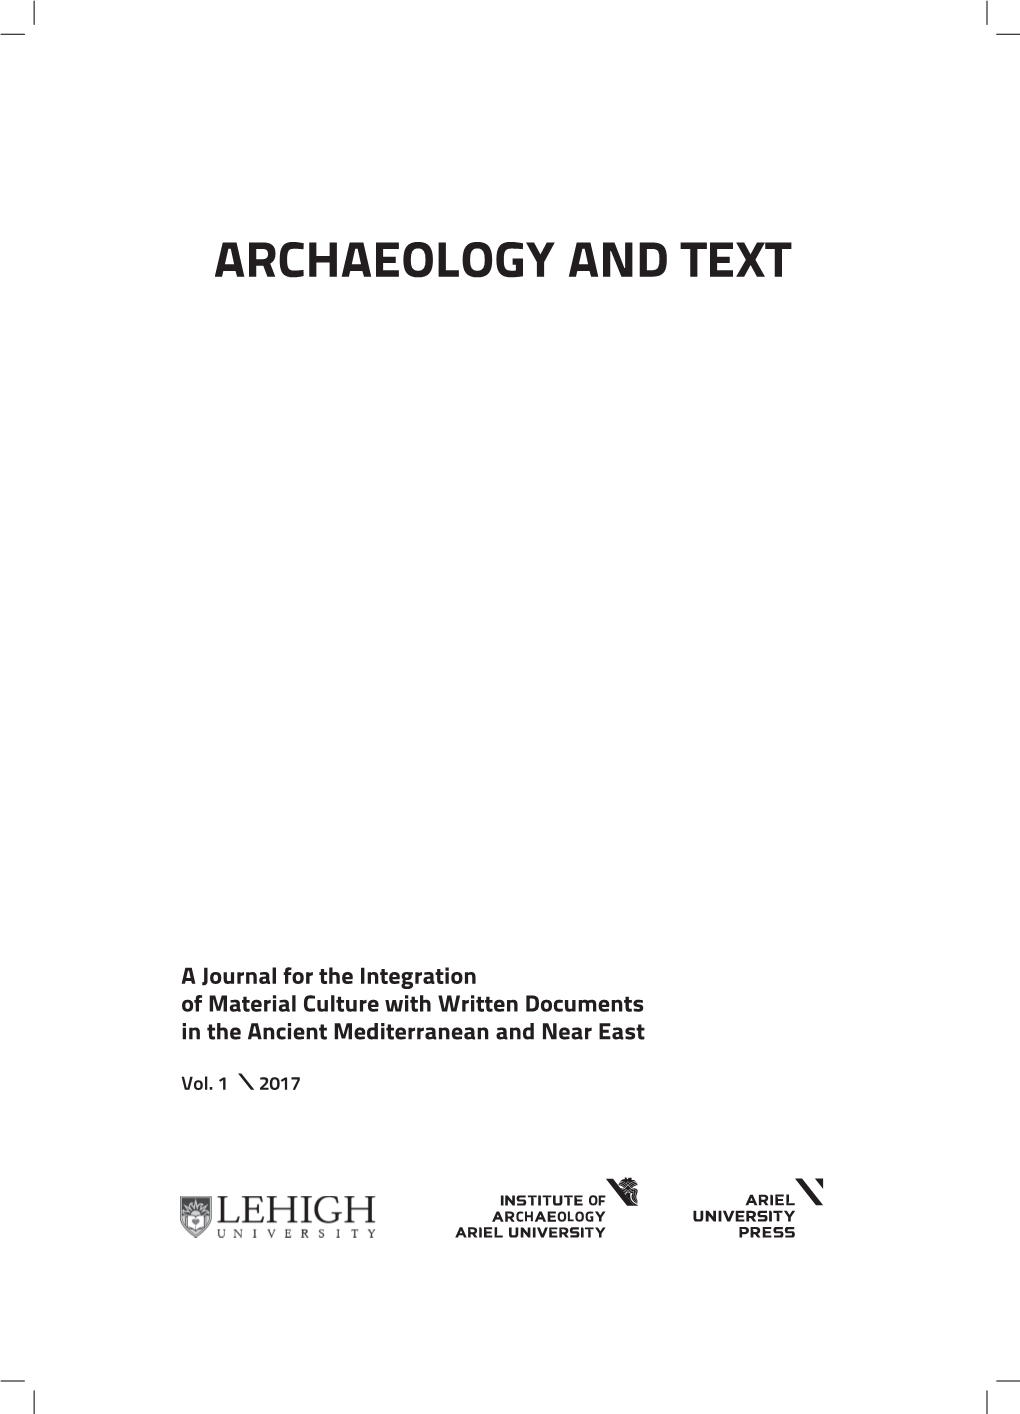 Archaeology and Text